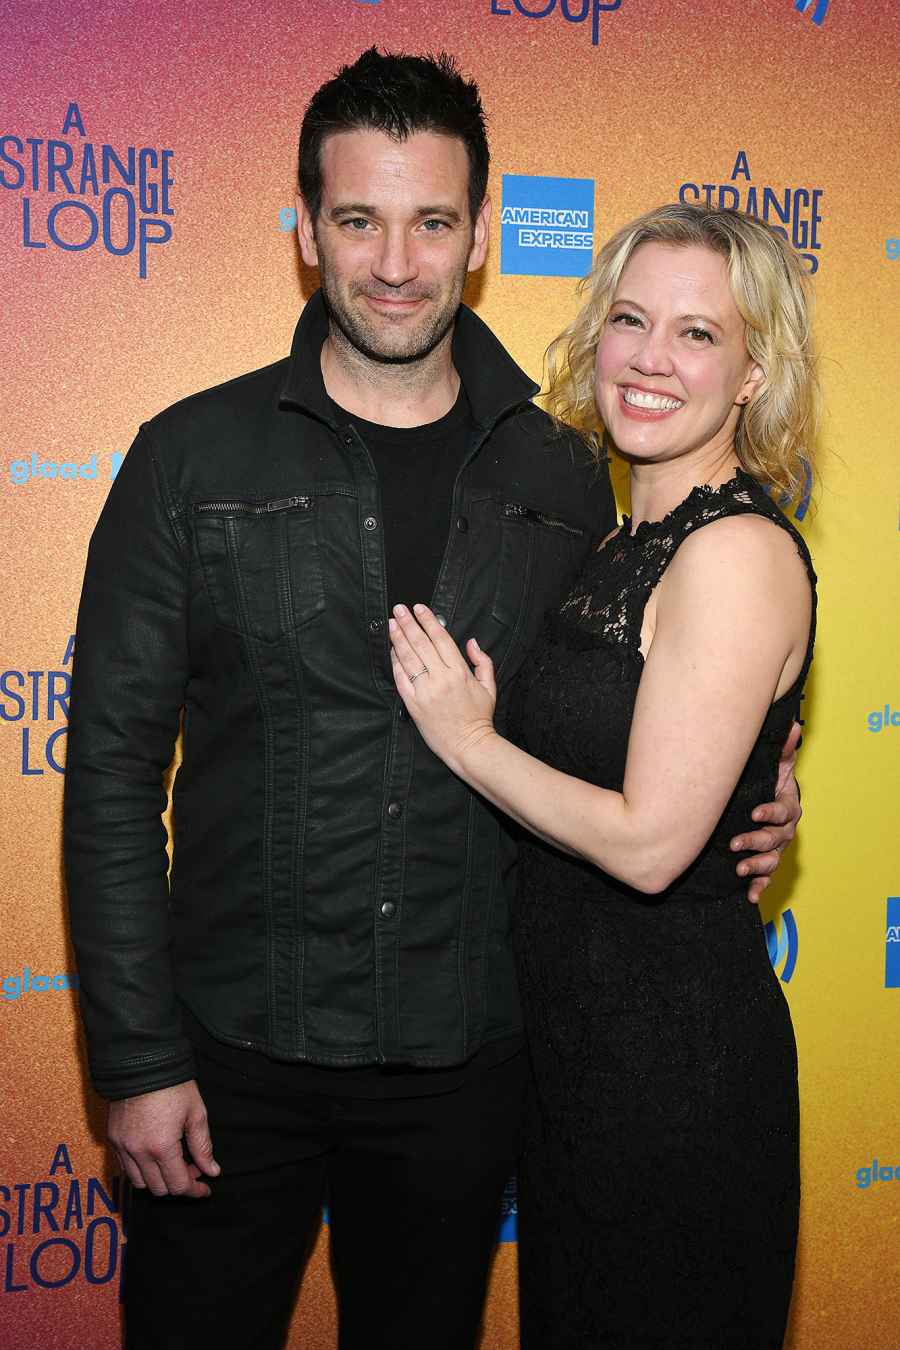 Broadway’s Patti Murin is Pregnant, Expecting 2nd Child With Husband Colin Donnell 085 'A Strange Loop' Opening Night on Broadway, Lyceum Theatre, New York, USA - 26 Apr 2022